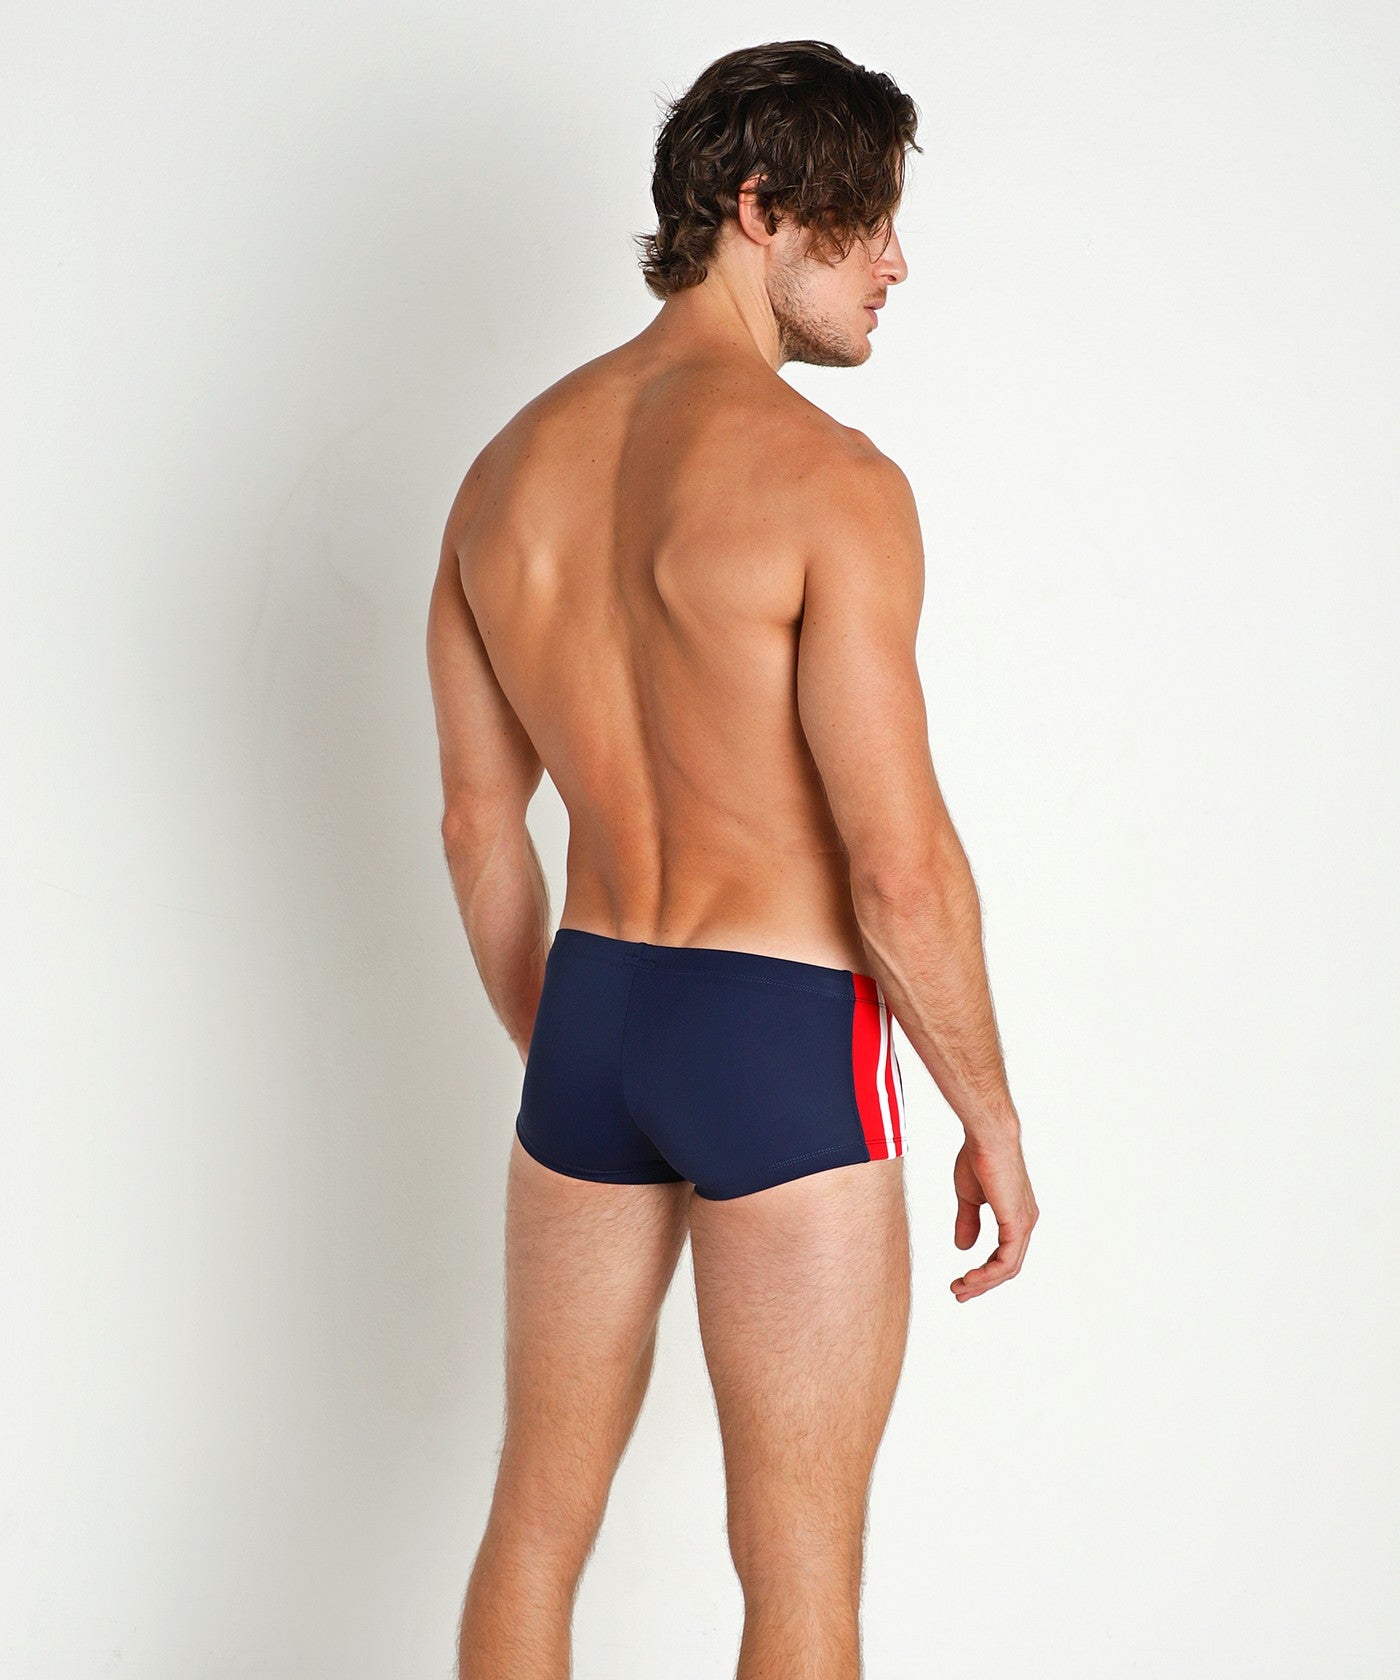 SCRIMMAGE LACE-UP SWIM TRUNK - DealByEthan.gay